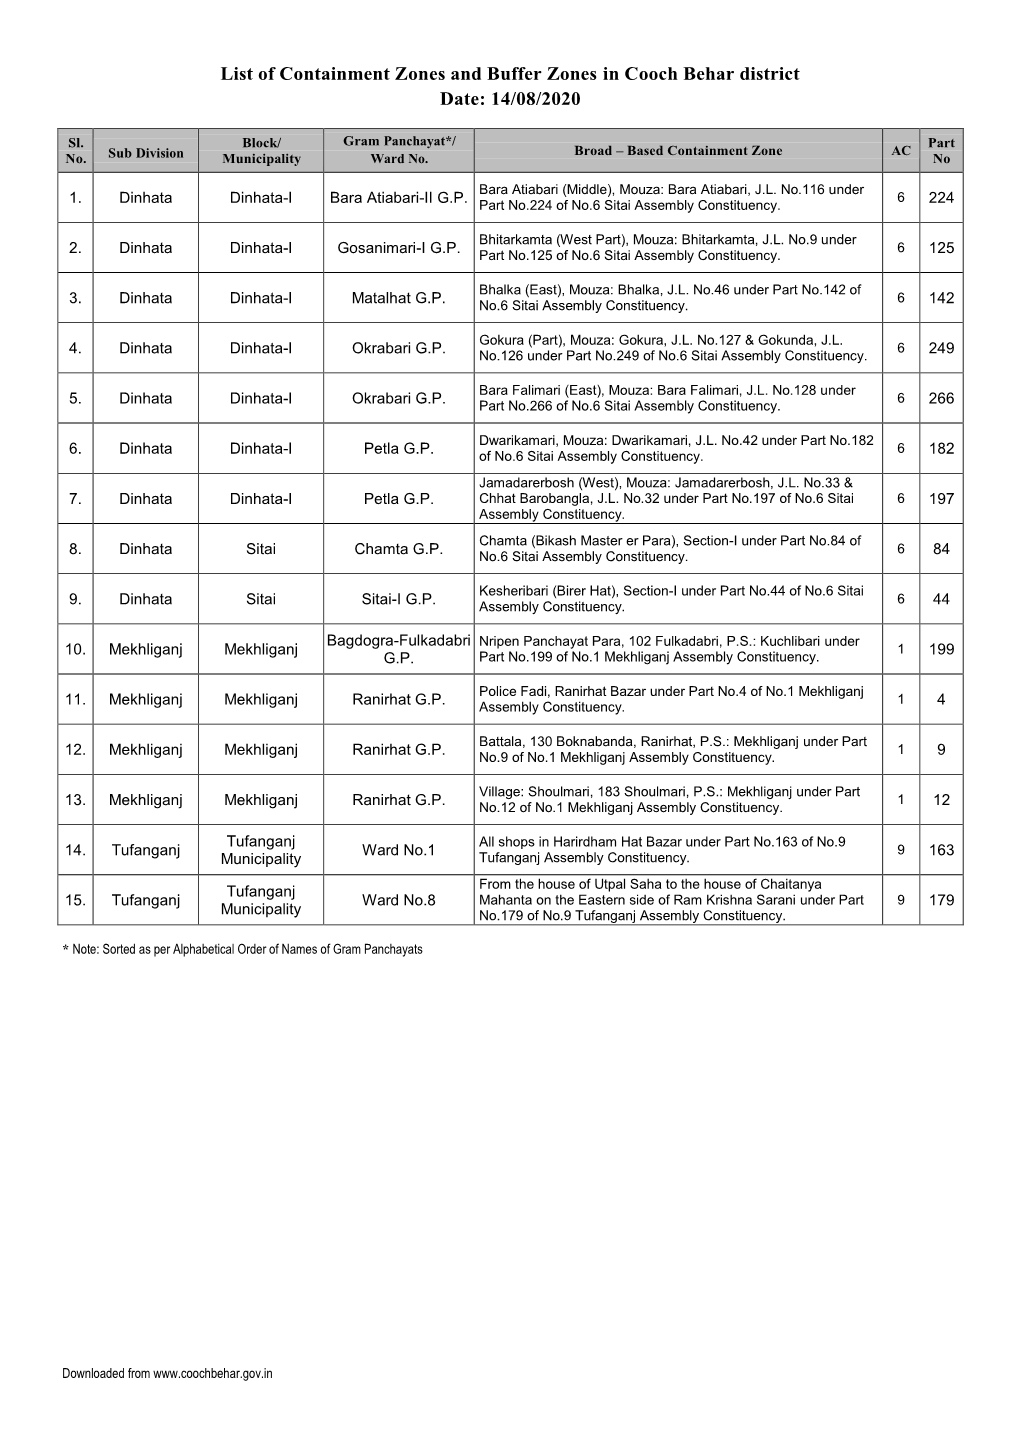 List of Containment Zones and Buffer Zones in Cooch Behar District Date: 14/08/2020